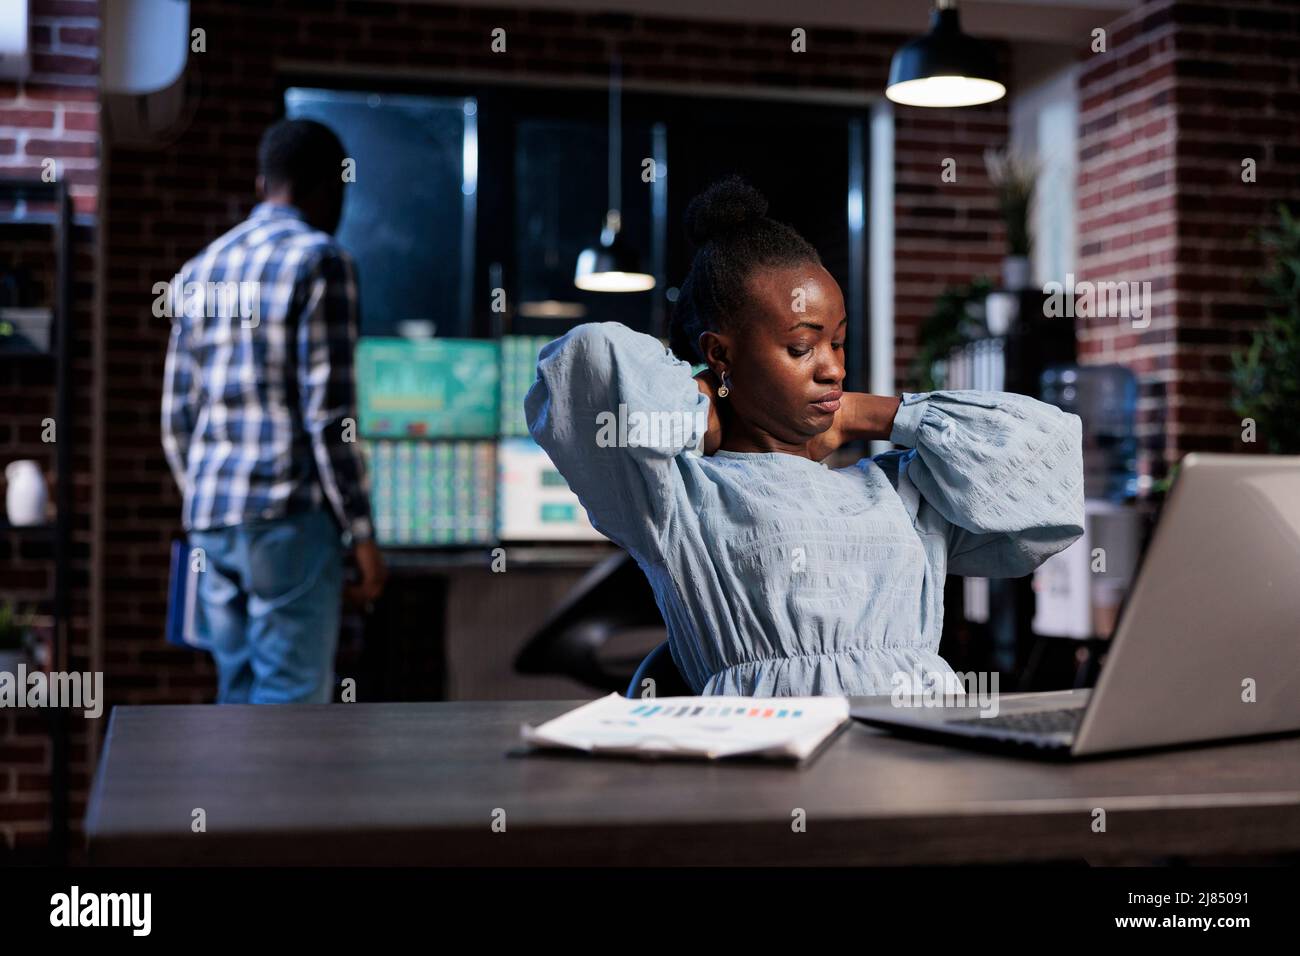 Tired financial analyst with neckache suffering from overwork hours. Forex stock market trading agency professional agent with neck pain sitting at desk in office workspace after a long day of work. Stock Photo